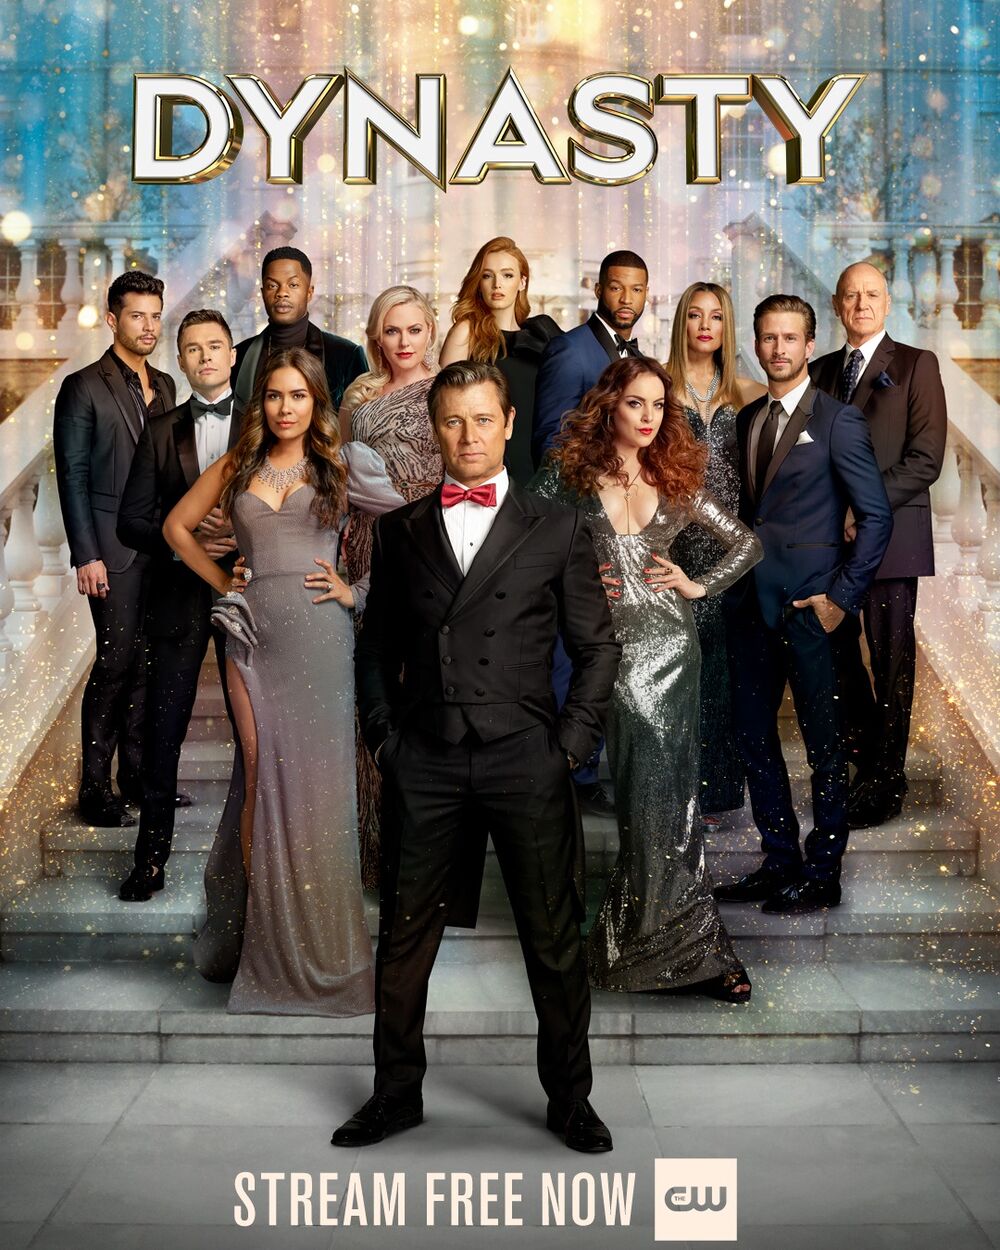 Point Classics track placed in TV series ‘Dynasty’ for the second time